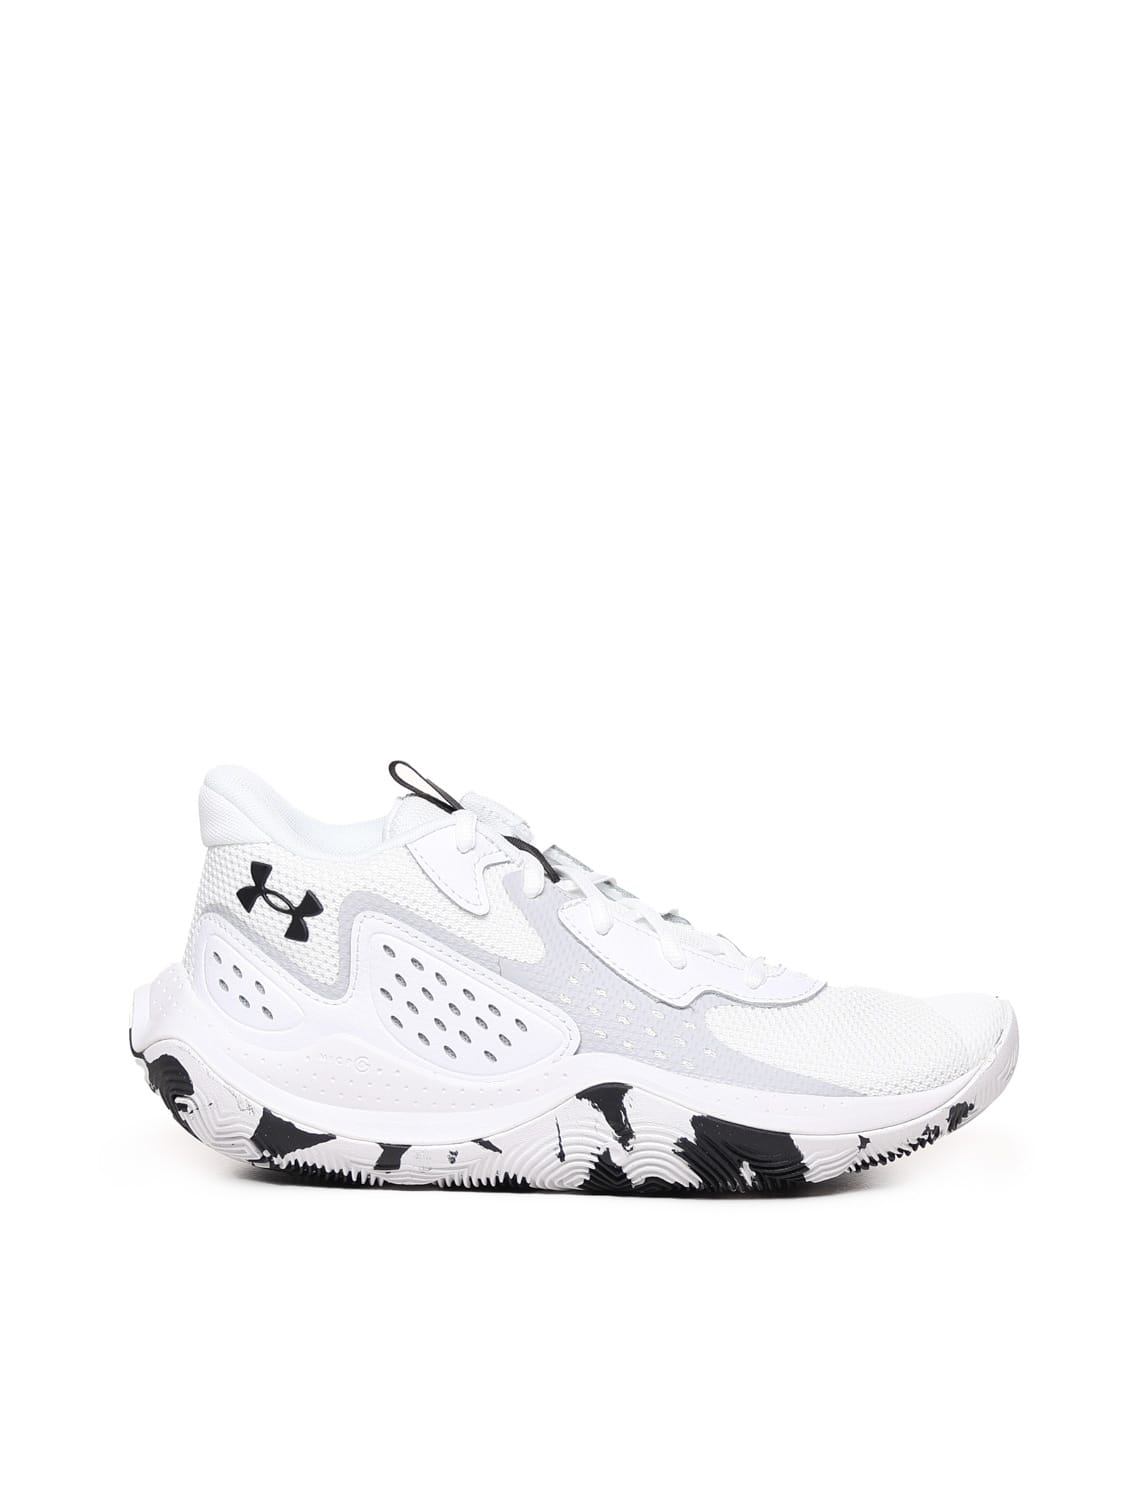 Under Armour Ua Jet 23 Basketball Shoes In White